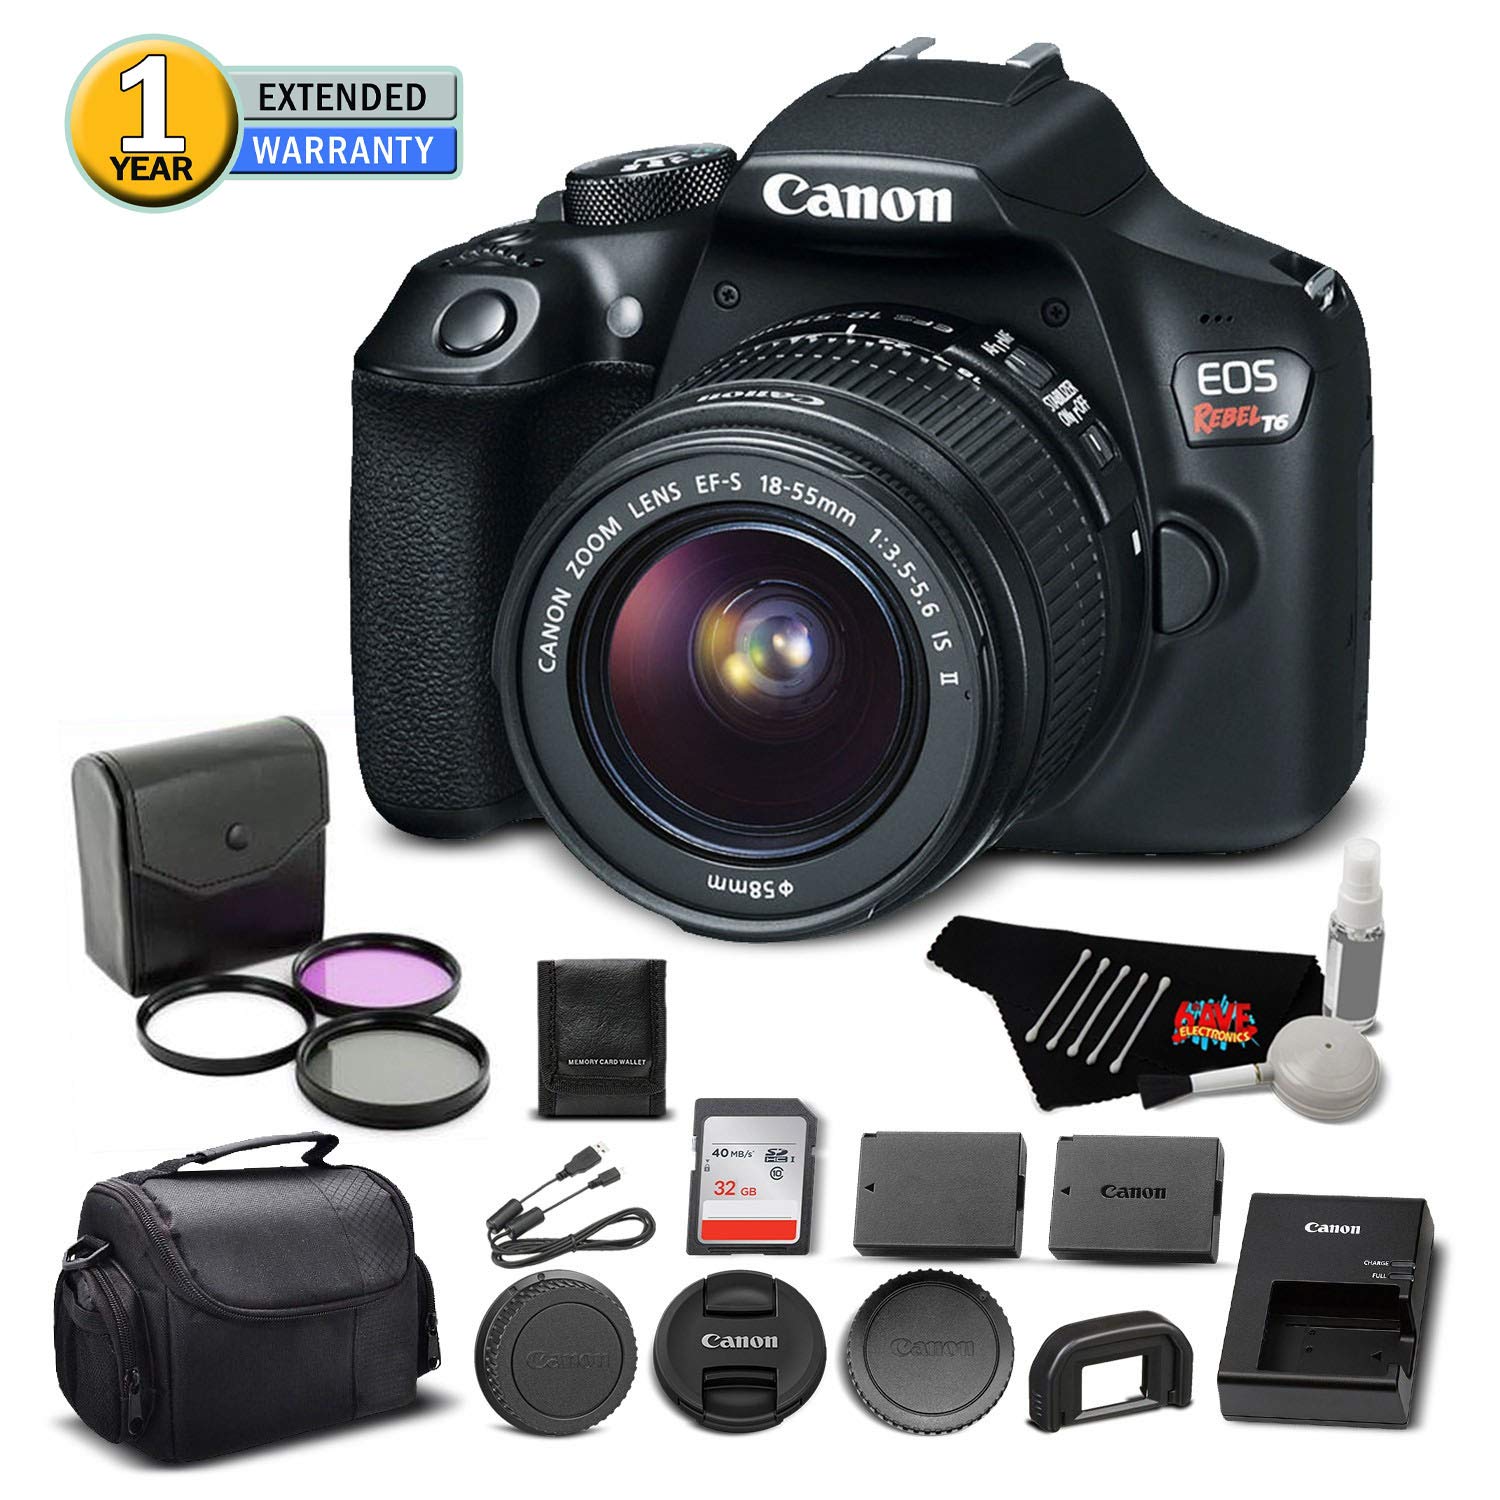 Canon EOS Rebel T6 Digital SLR Camera 1159C003 Bundle with 18-55mm f/3.5-5.6 is II Lens with 32GB Memory Card + More